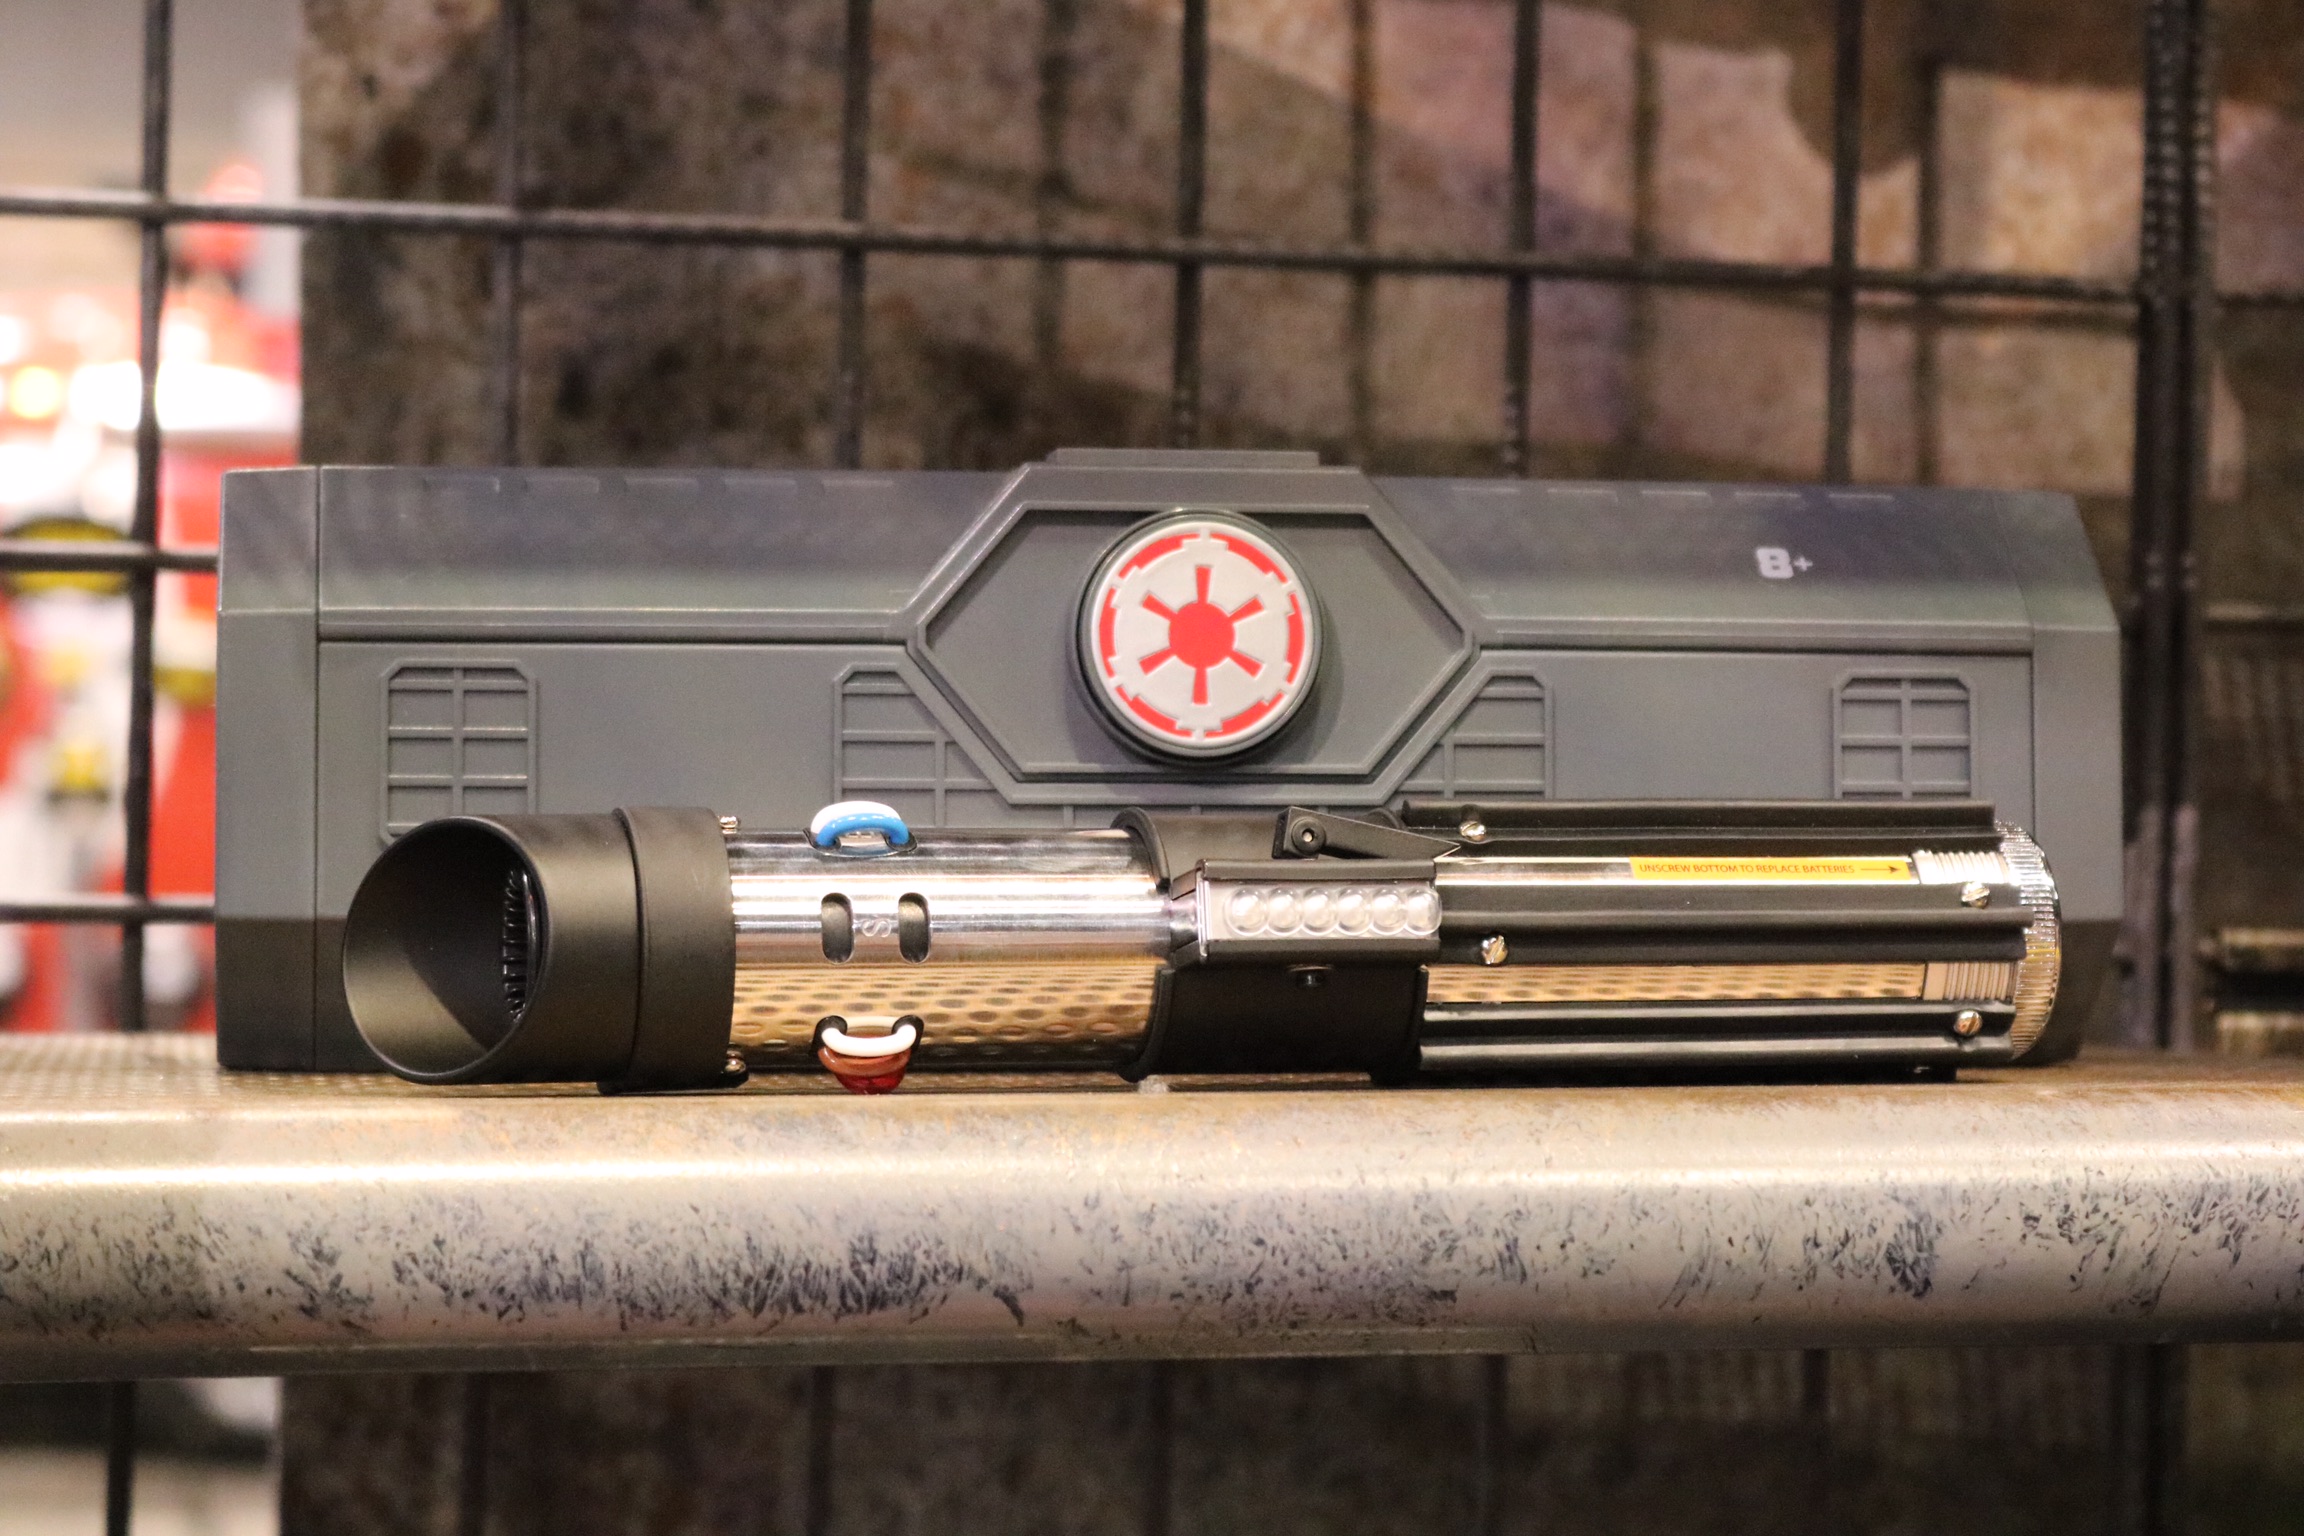 Darth Vader’s lightsaber, the most infamous weapon in the galaxy, will be one of the many options available. 